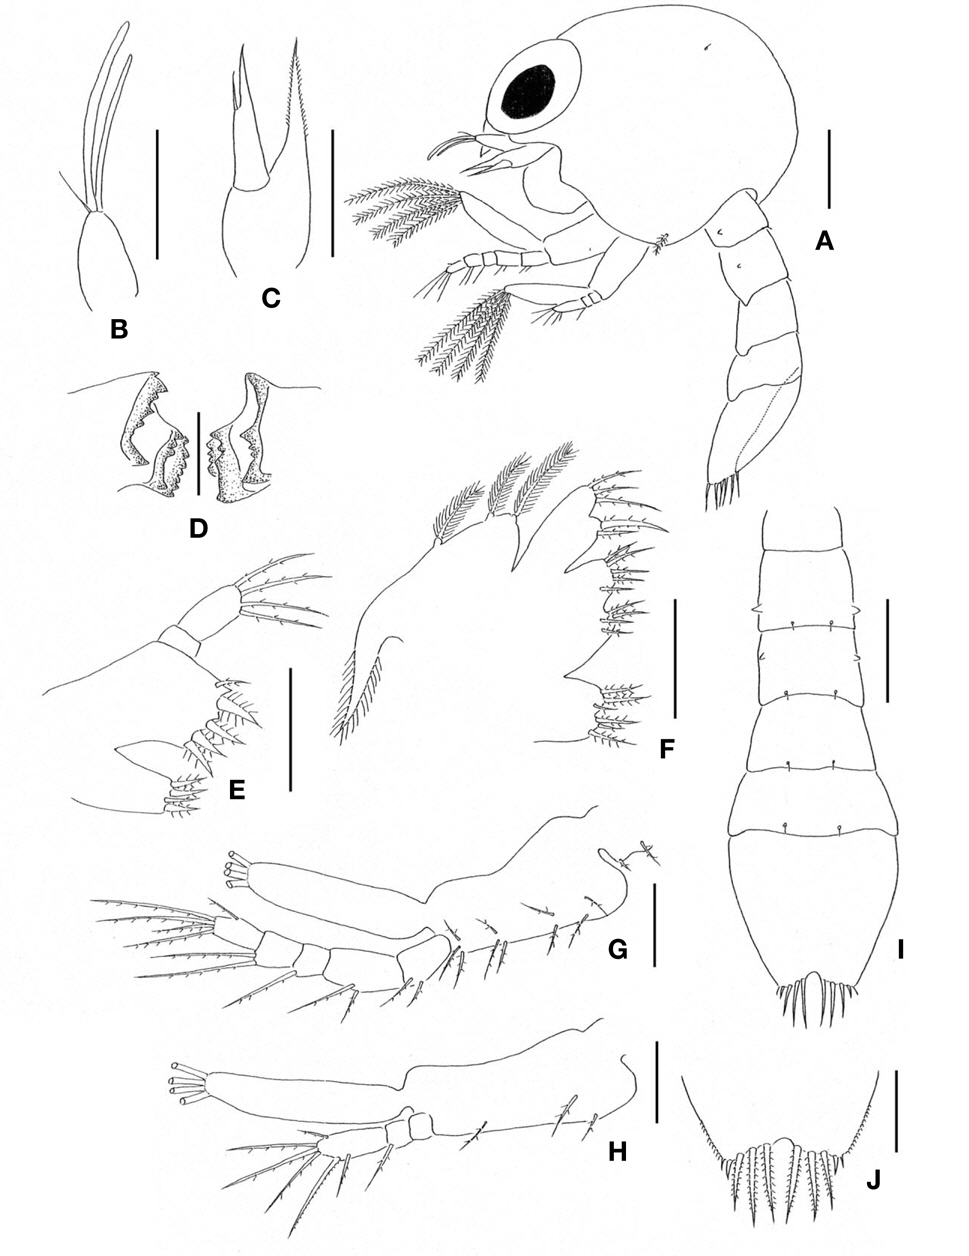 Camptandrium sexdentatum, first zoeal stage. A, Lateral view; B, Antennule; C, Antenna; D, Mandibles; E, Maxillule; F, Maxilla; G, First maxilliped; H, Second maxilliped; I, Dorsal view of abdomen and telson; J, Posterior region of telson. Scale bars: A, I=0.1 mm, B-H, J=0.05 mm.